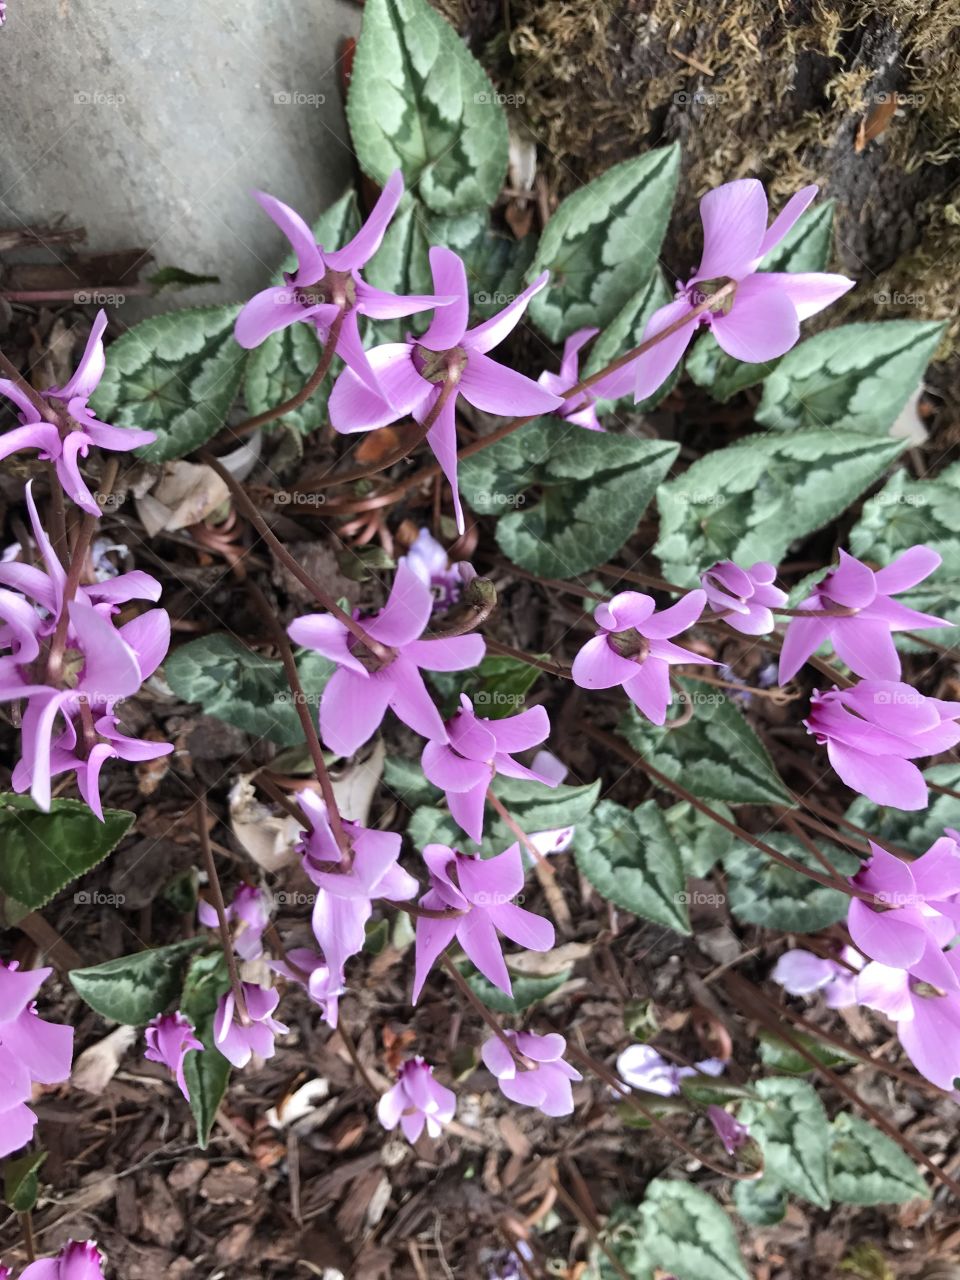 Love this little pink flowers. They are called cyclamen. Pretty cool looking plants with those awesome snake like leaves.